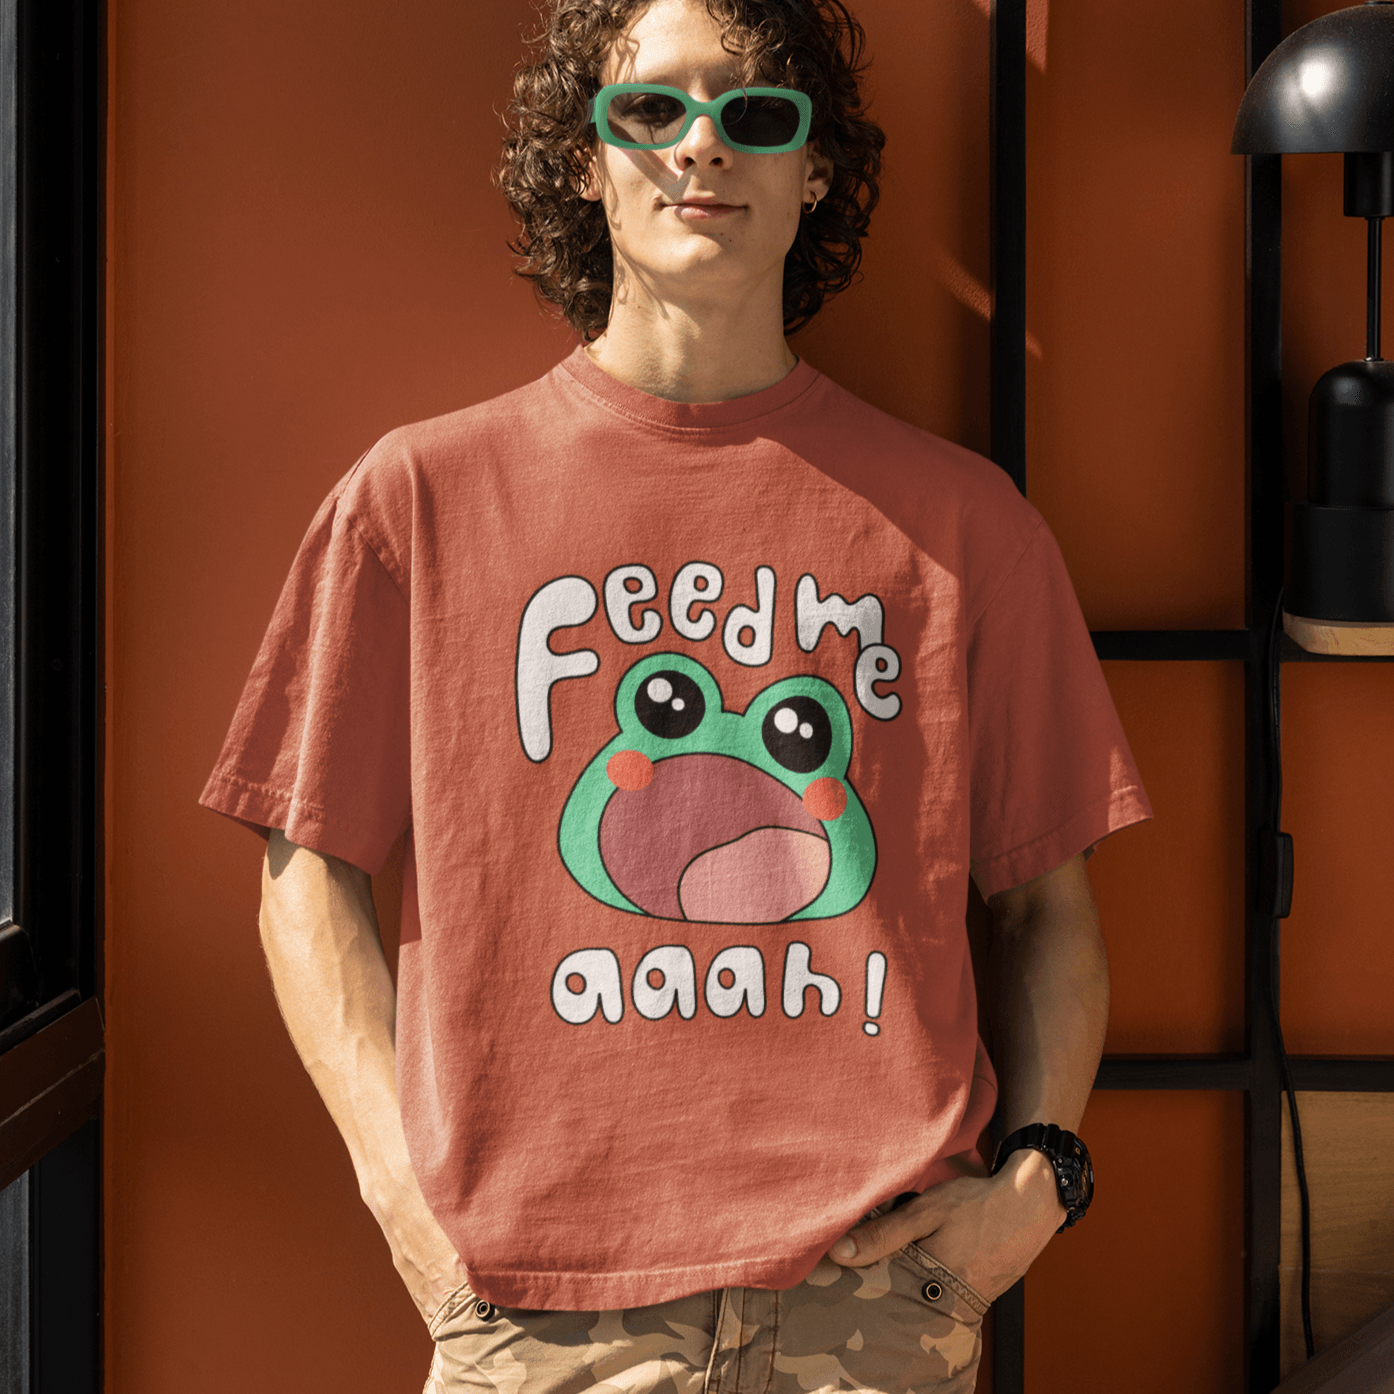 Feed Me- Hungry Toad Unisex Oversized T-shirts - Cute Stuff India